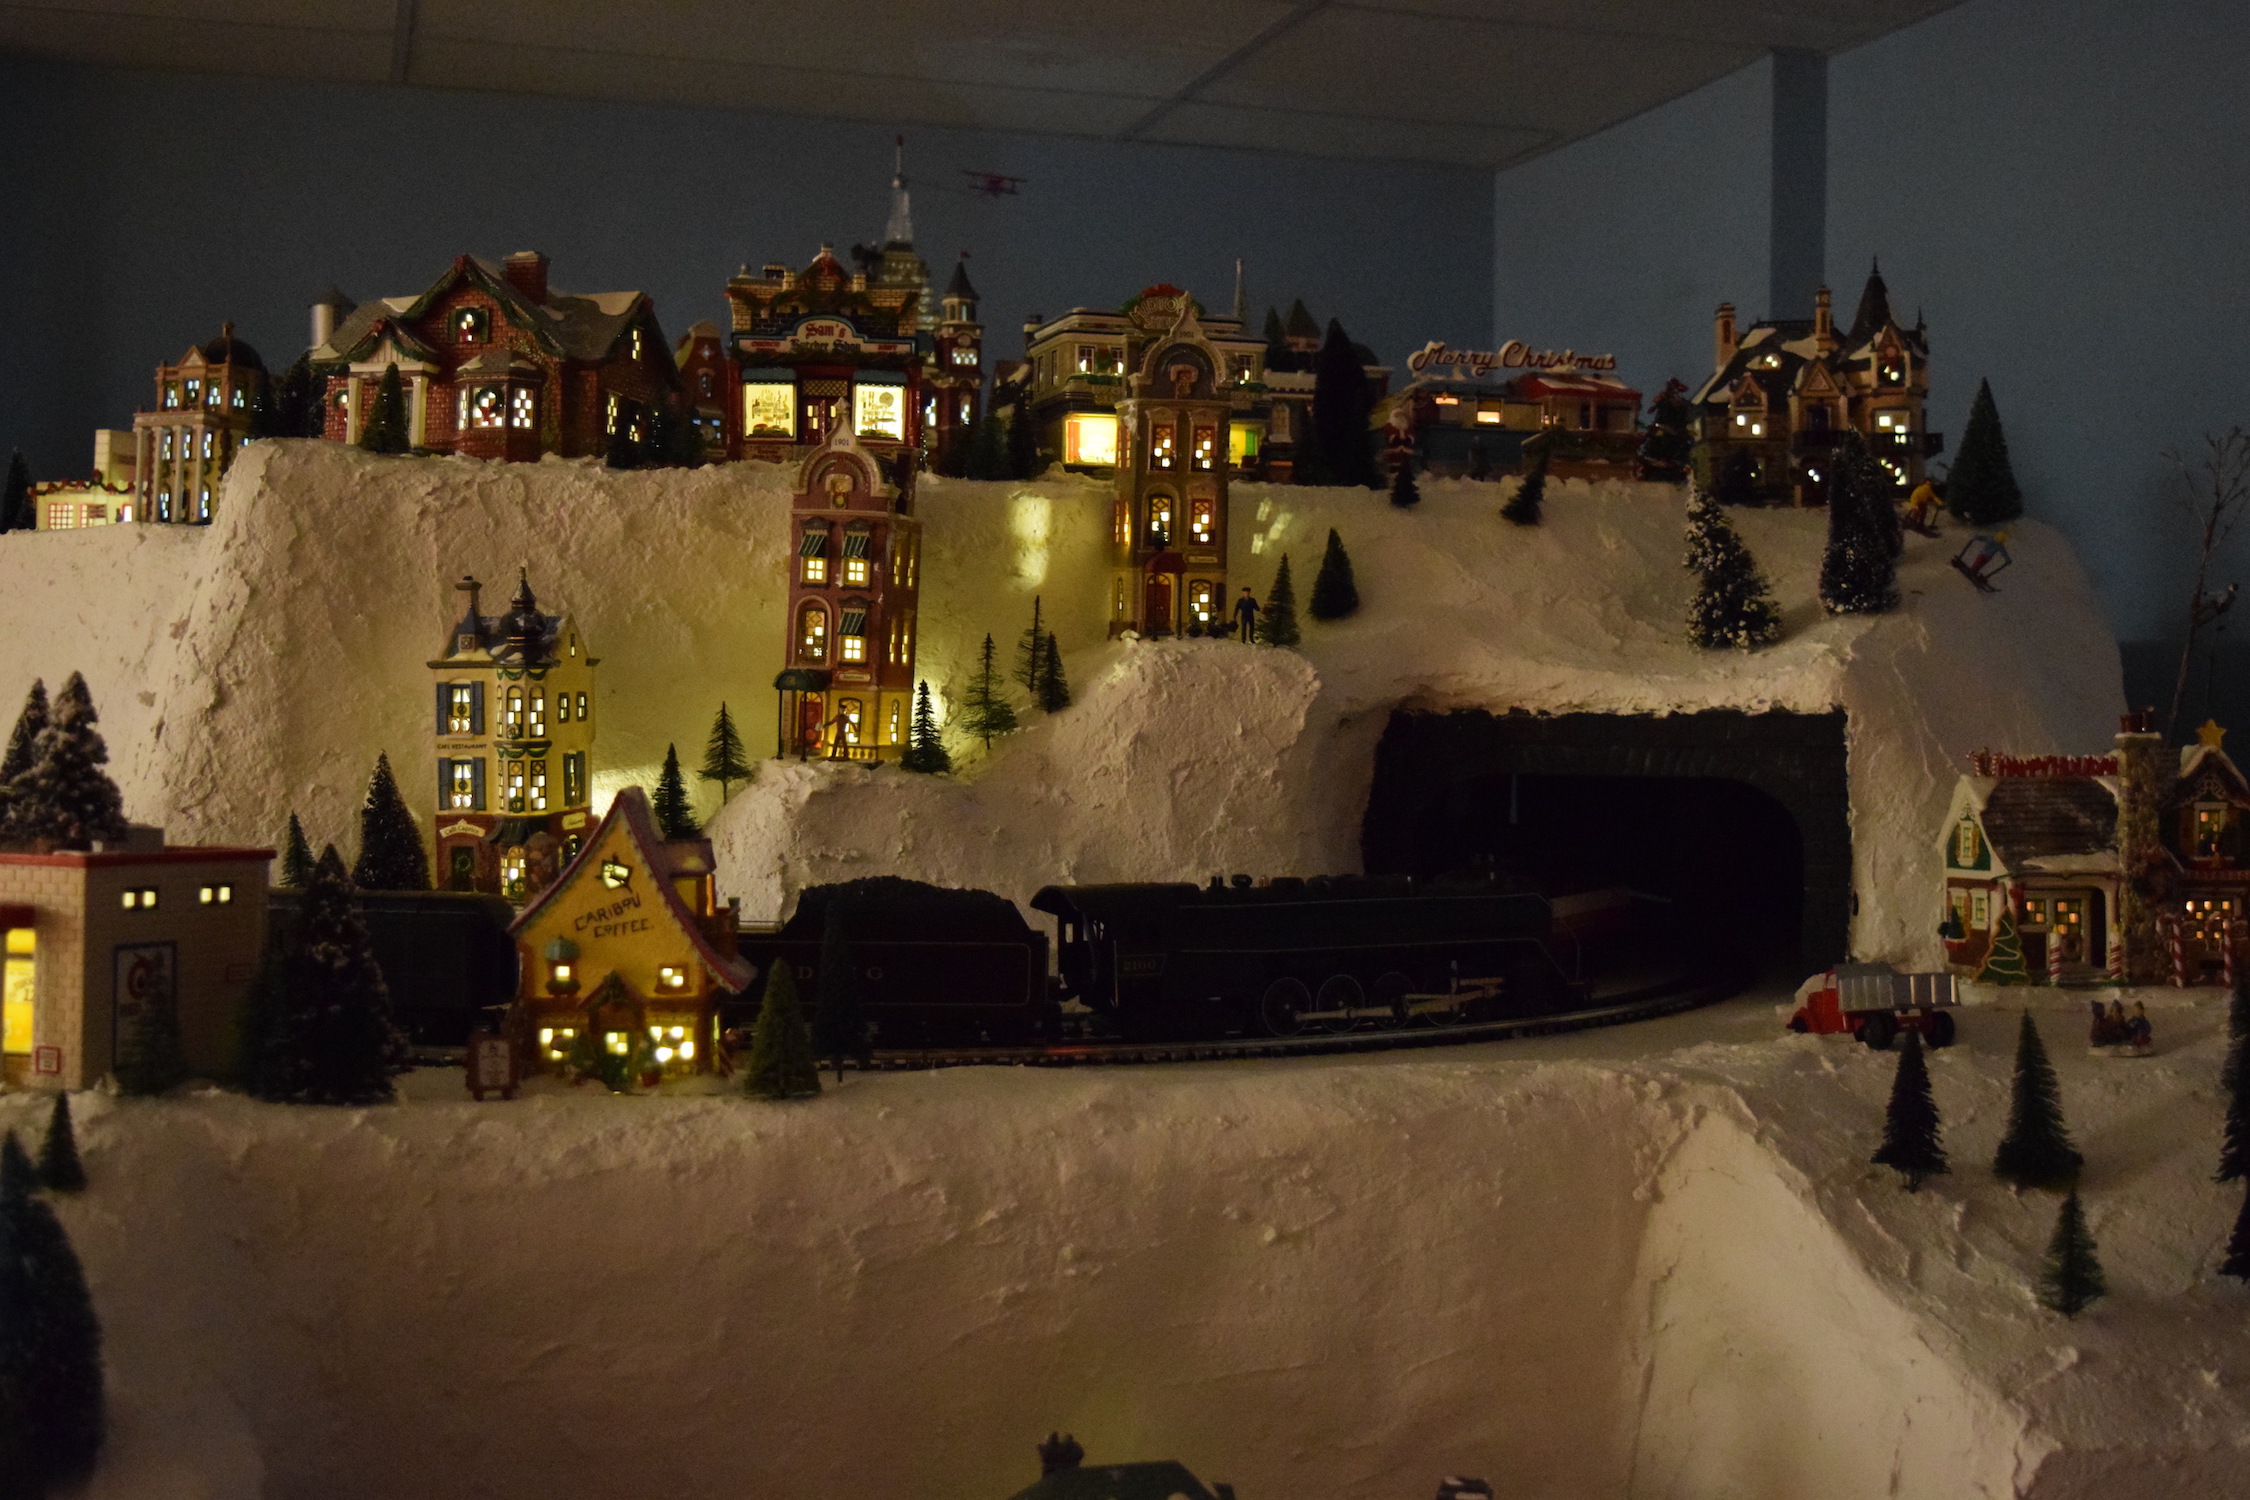 A winter scene at night in town - Christmas at the Roundhouse" model train display.